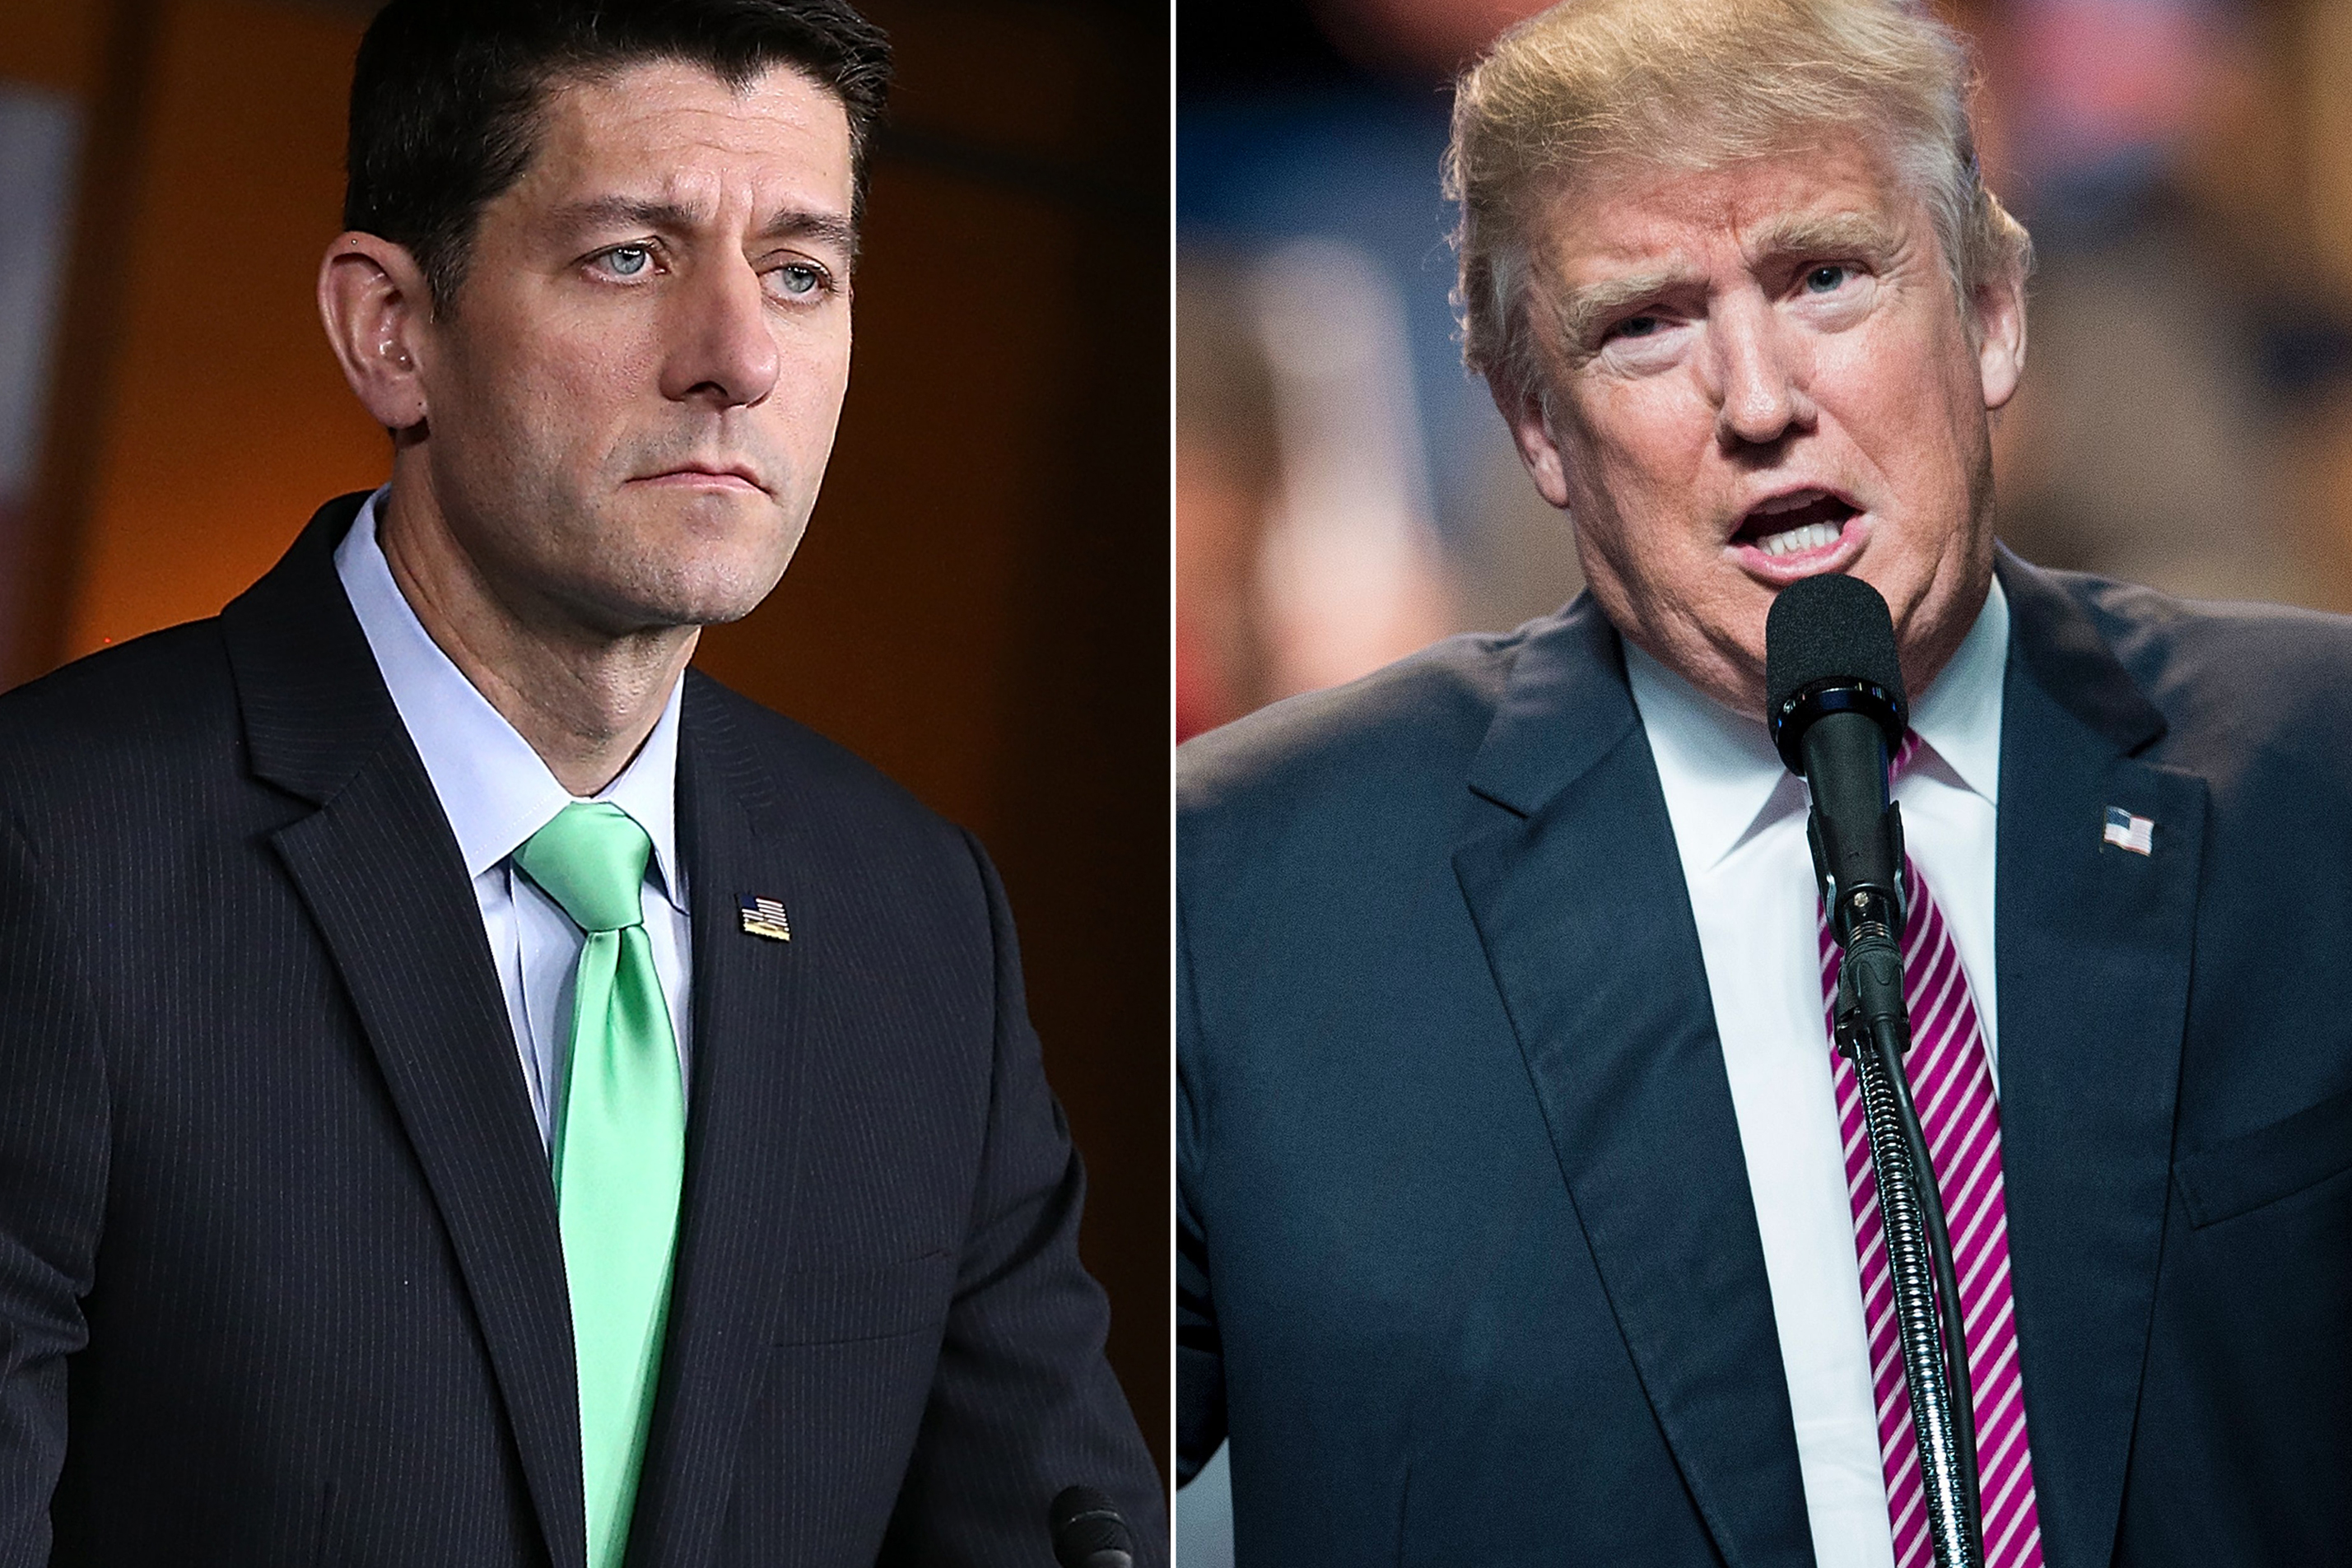 Paul Ryan in Washington, on April 28, 2016 (L); Donald Trump in Charleston, West Virginia, on May 5, 2016. (Win McNamee—Getty Images (L); Brendan Smialowski—Getty Images)